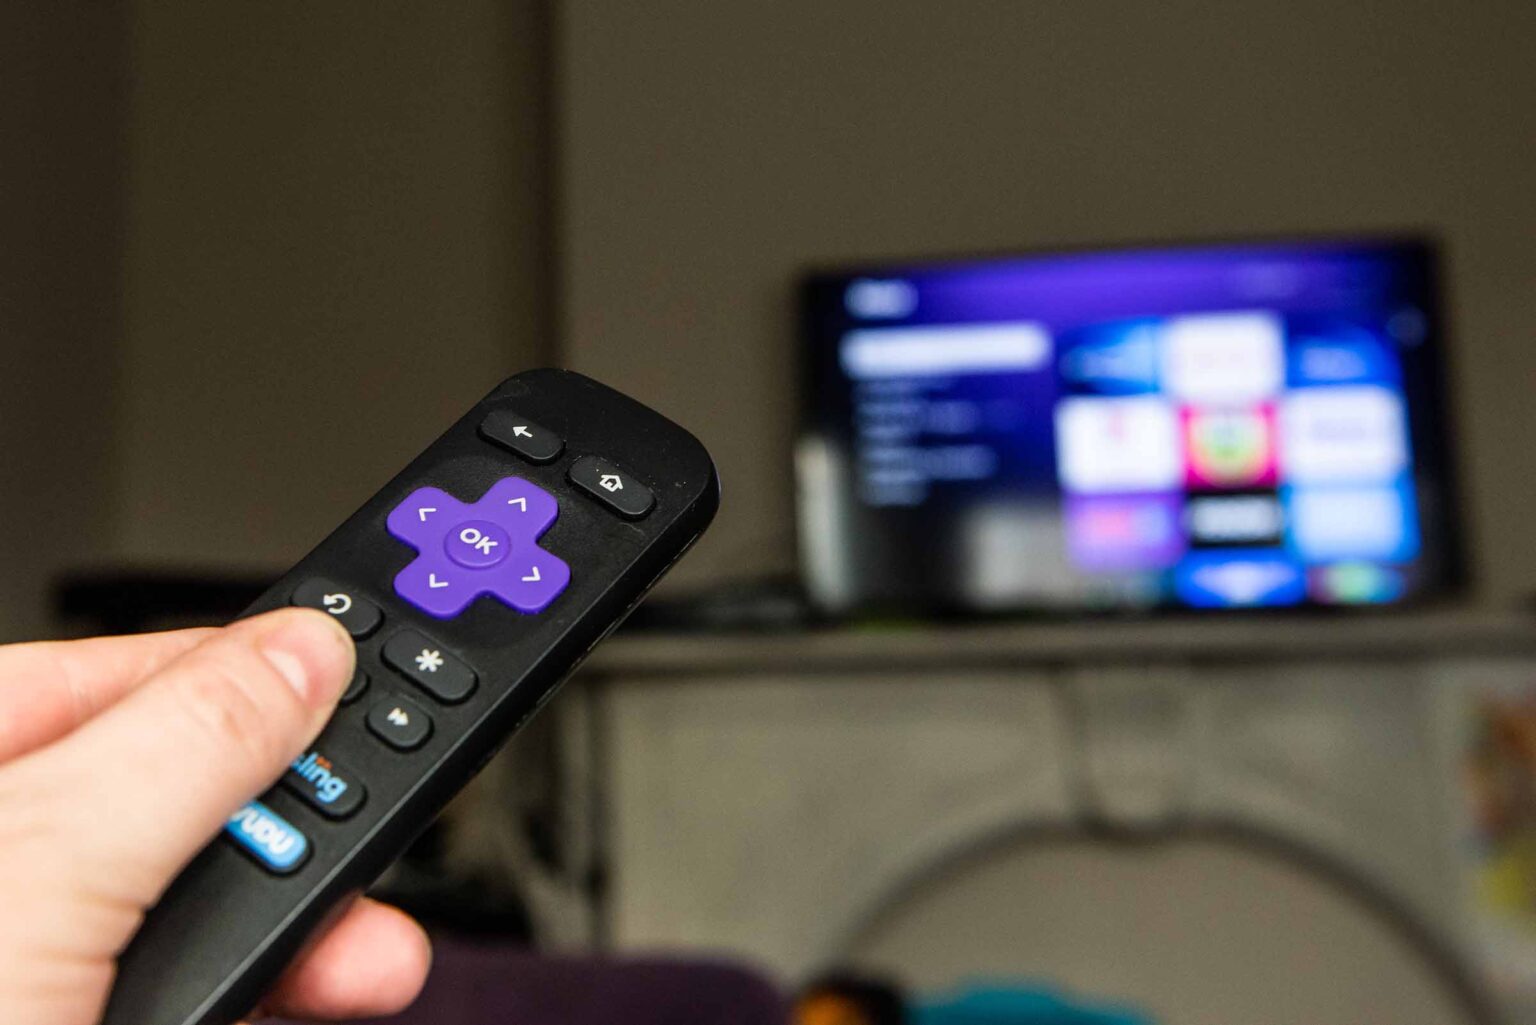 Are you having problems with buffering or stuttering on your Roku? Learn about some of the best ways to improve quality on your Roku device!